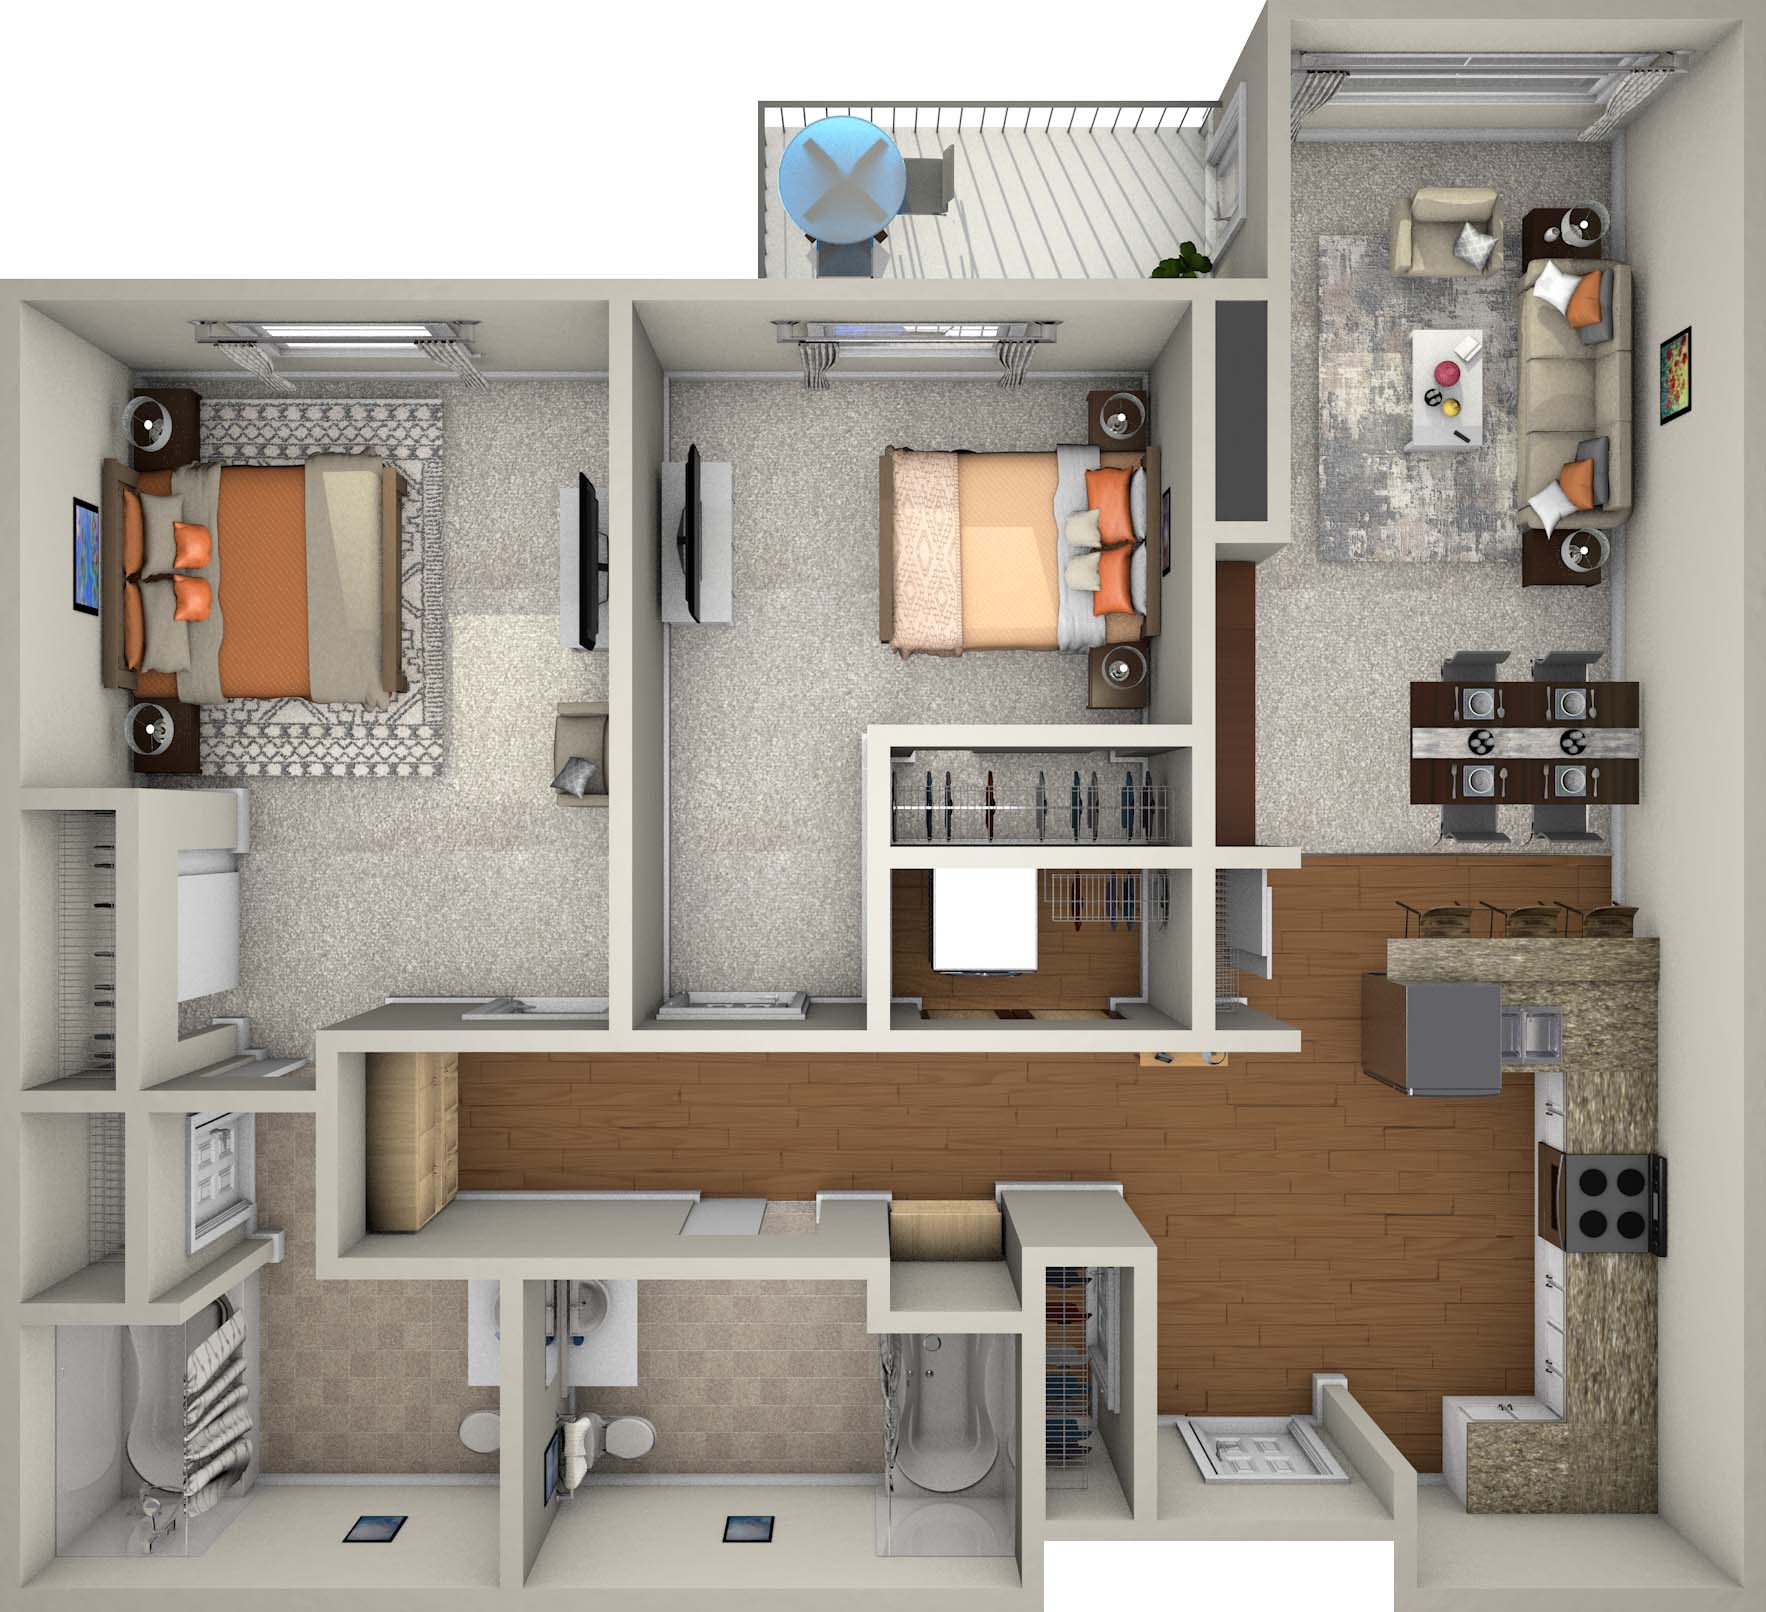 Courtyard fountains Independent Living 2 Bedroom - 1067 sq ft